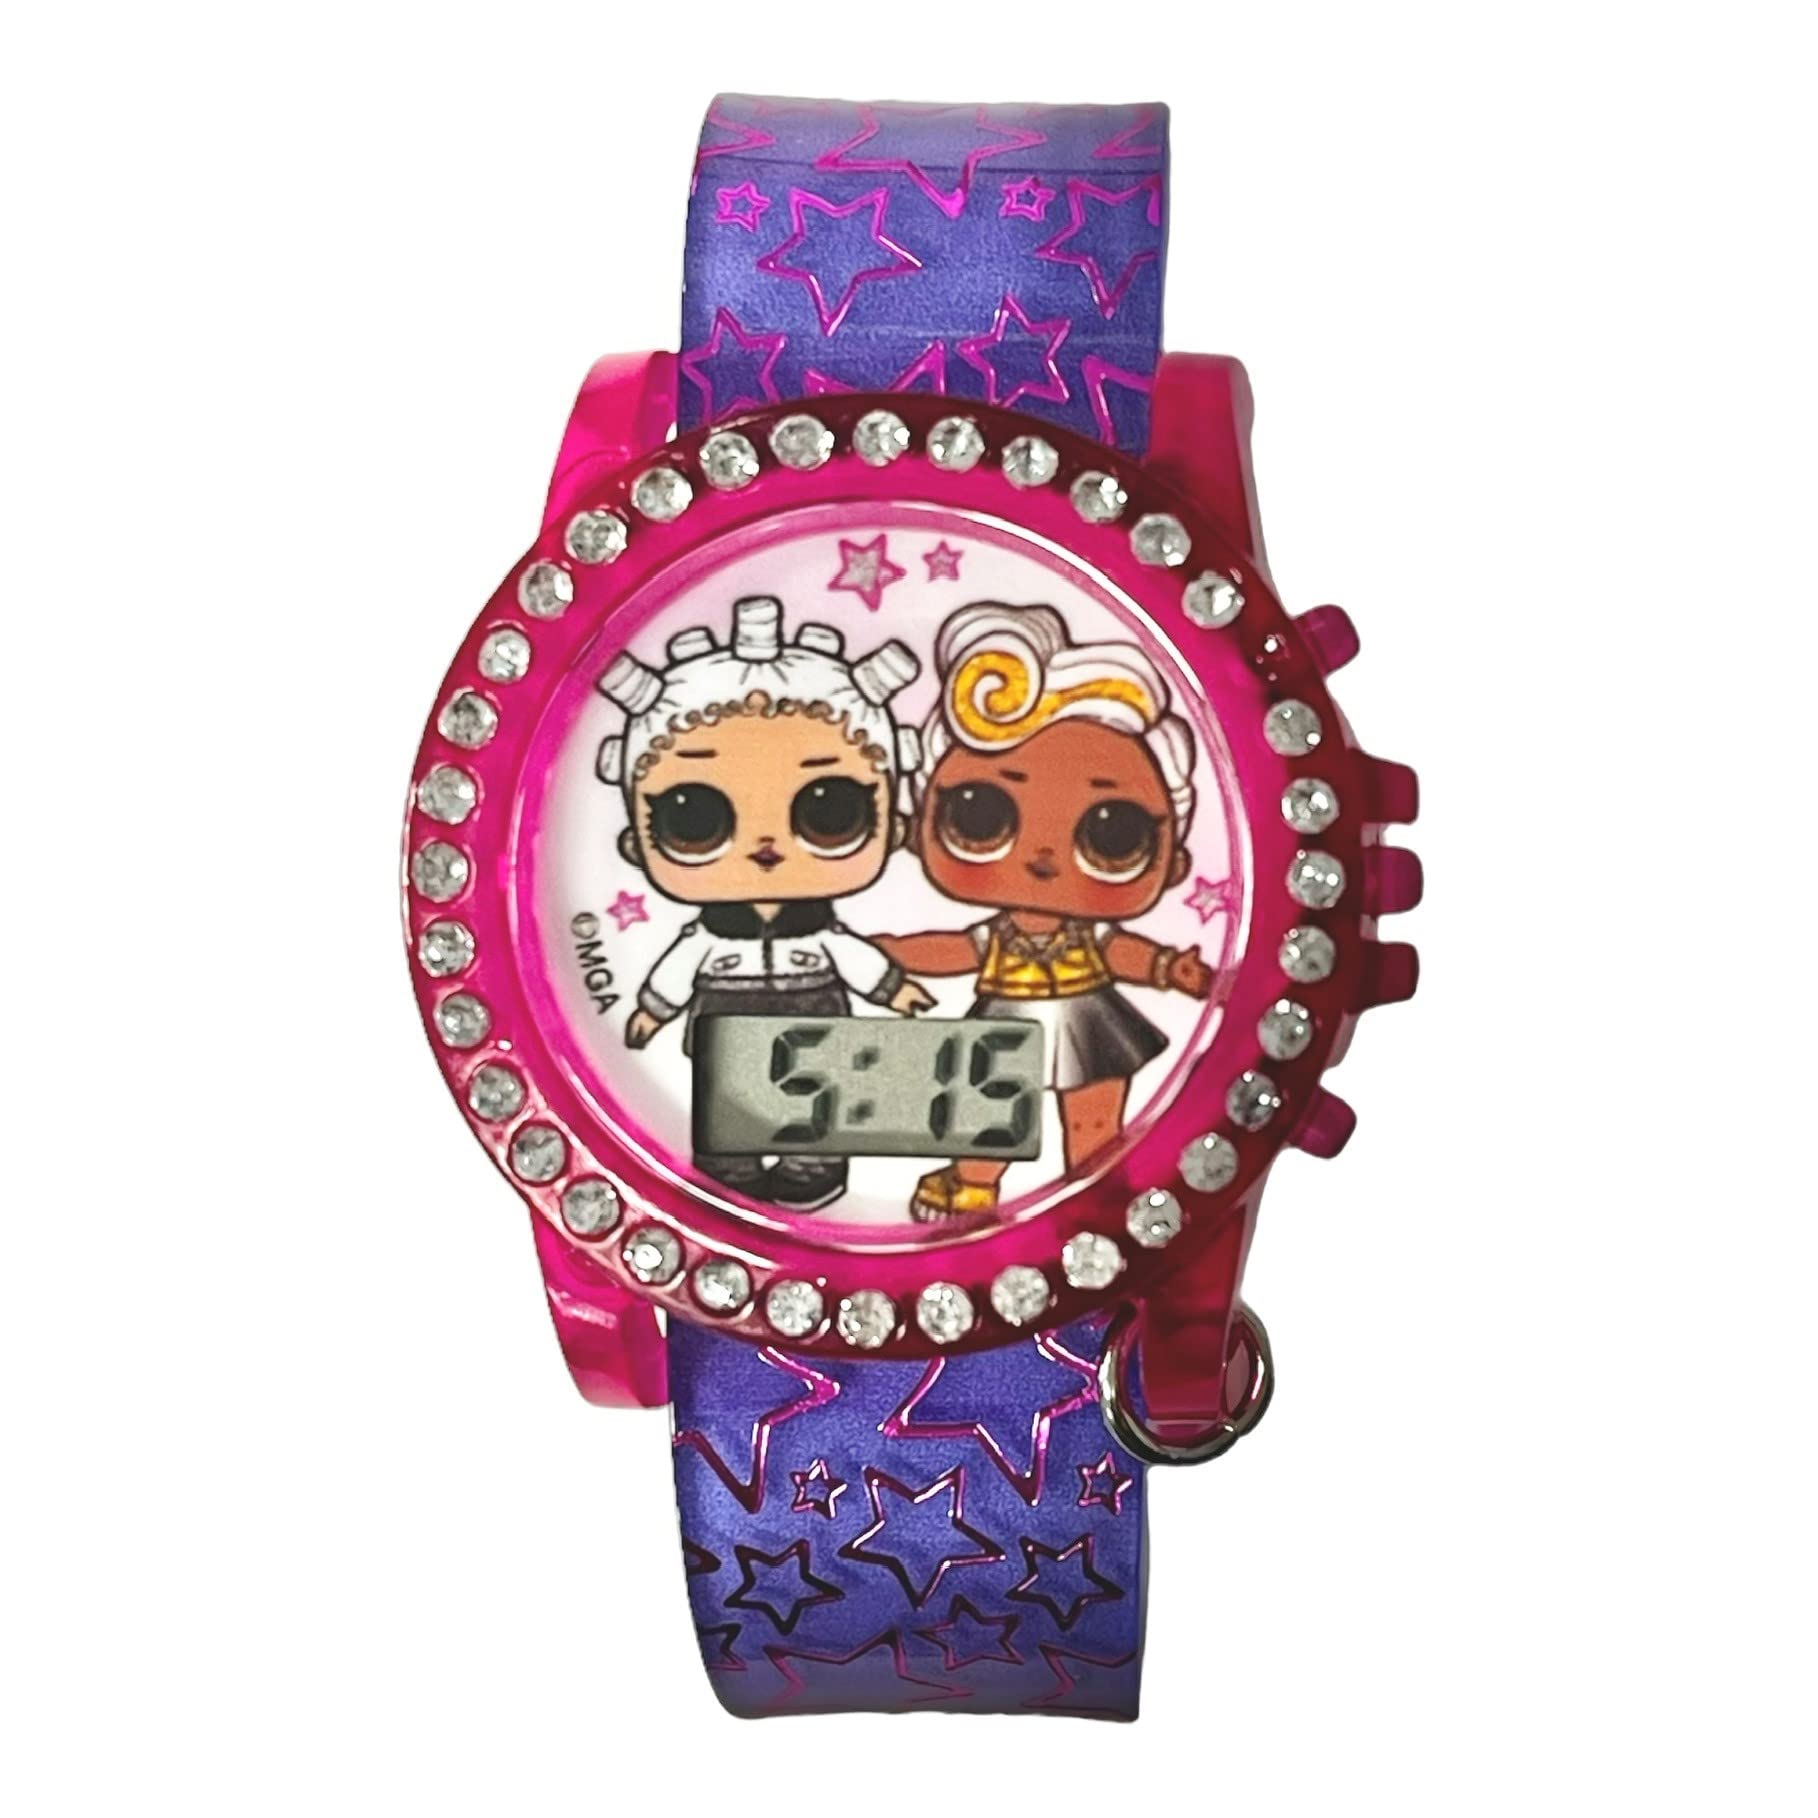 Accutime Official L.O.L. Surprise! Kid's Watch for Girls and Boys